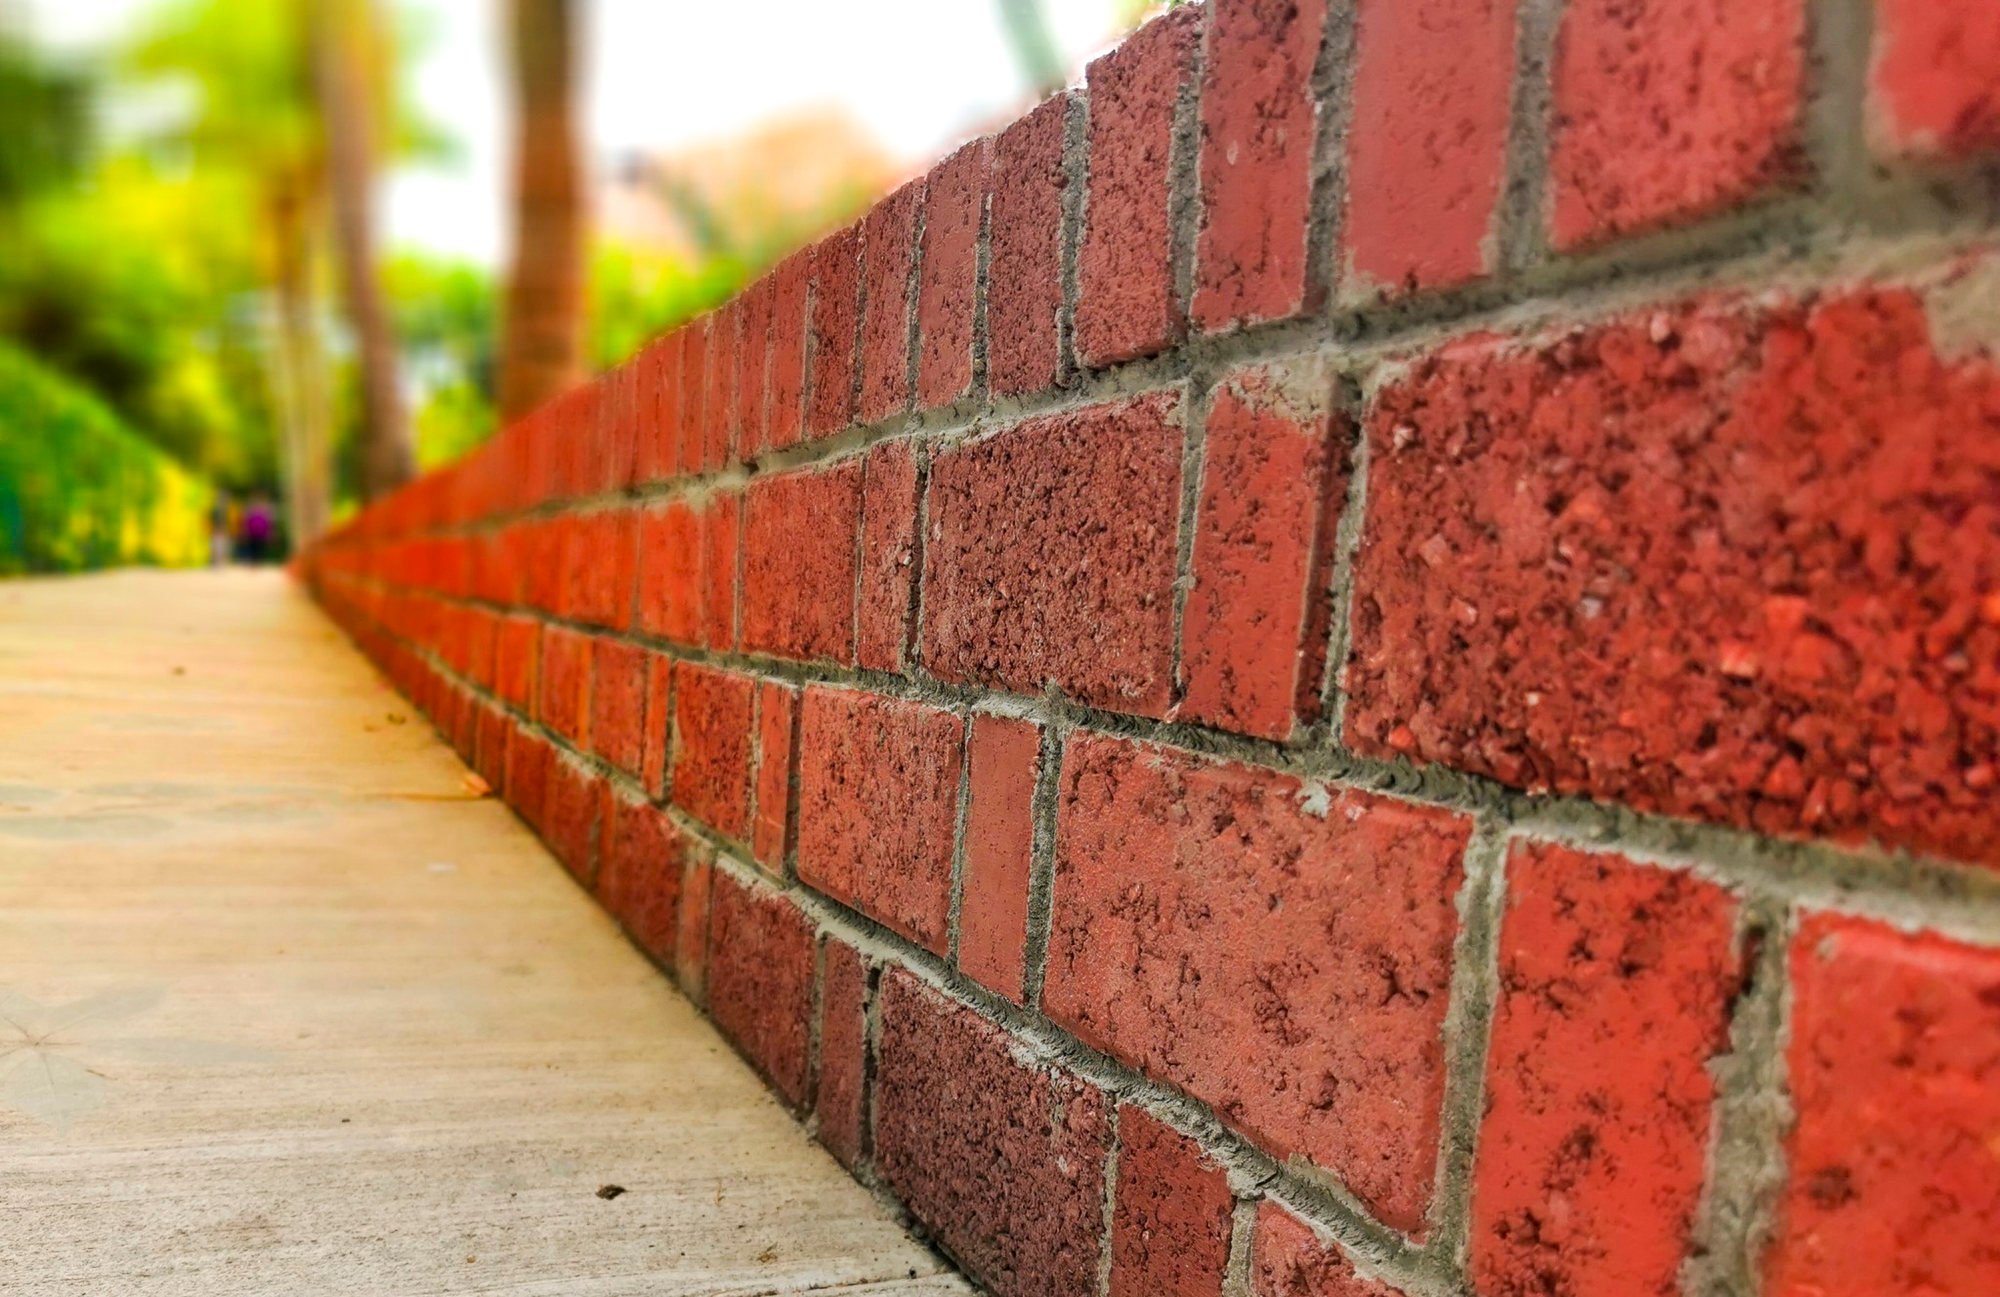 How Can We Reduce the Carbon Footprint of Bricks?